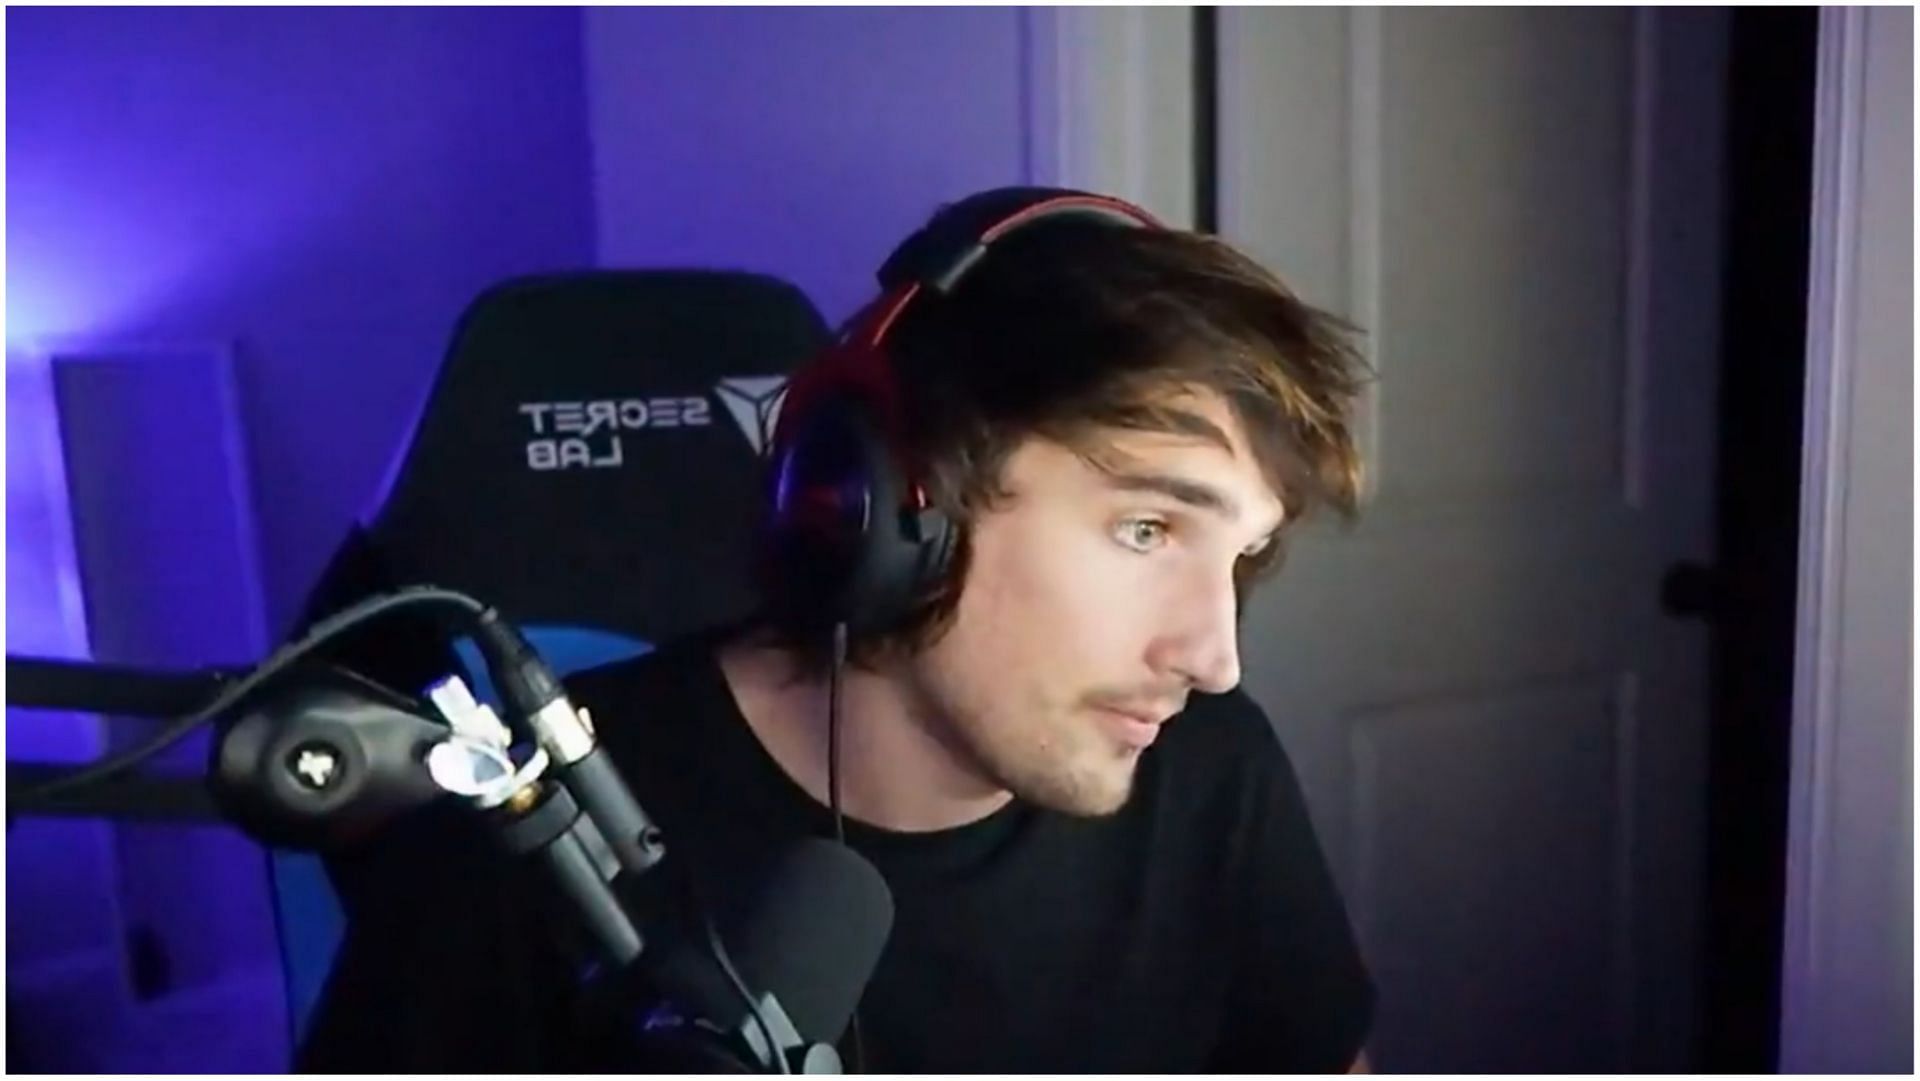 Mitch Jones went live to address his involvement in covering up CrazySlick